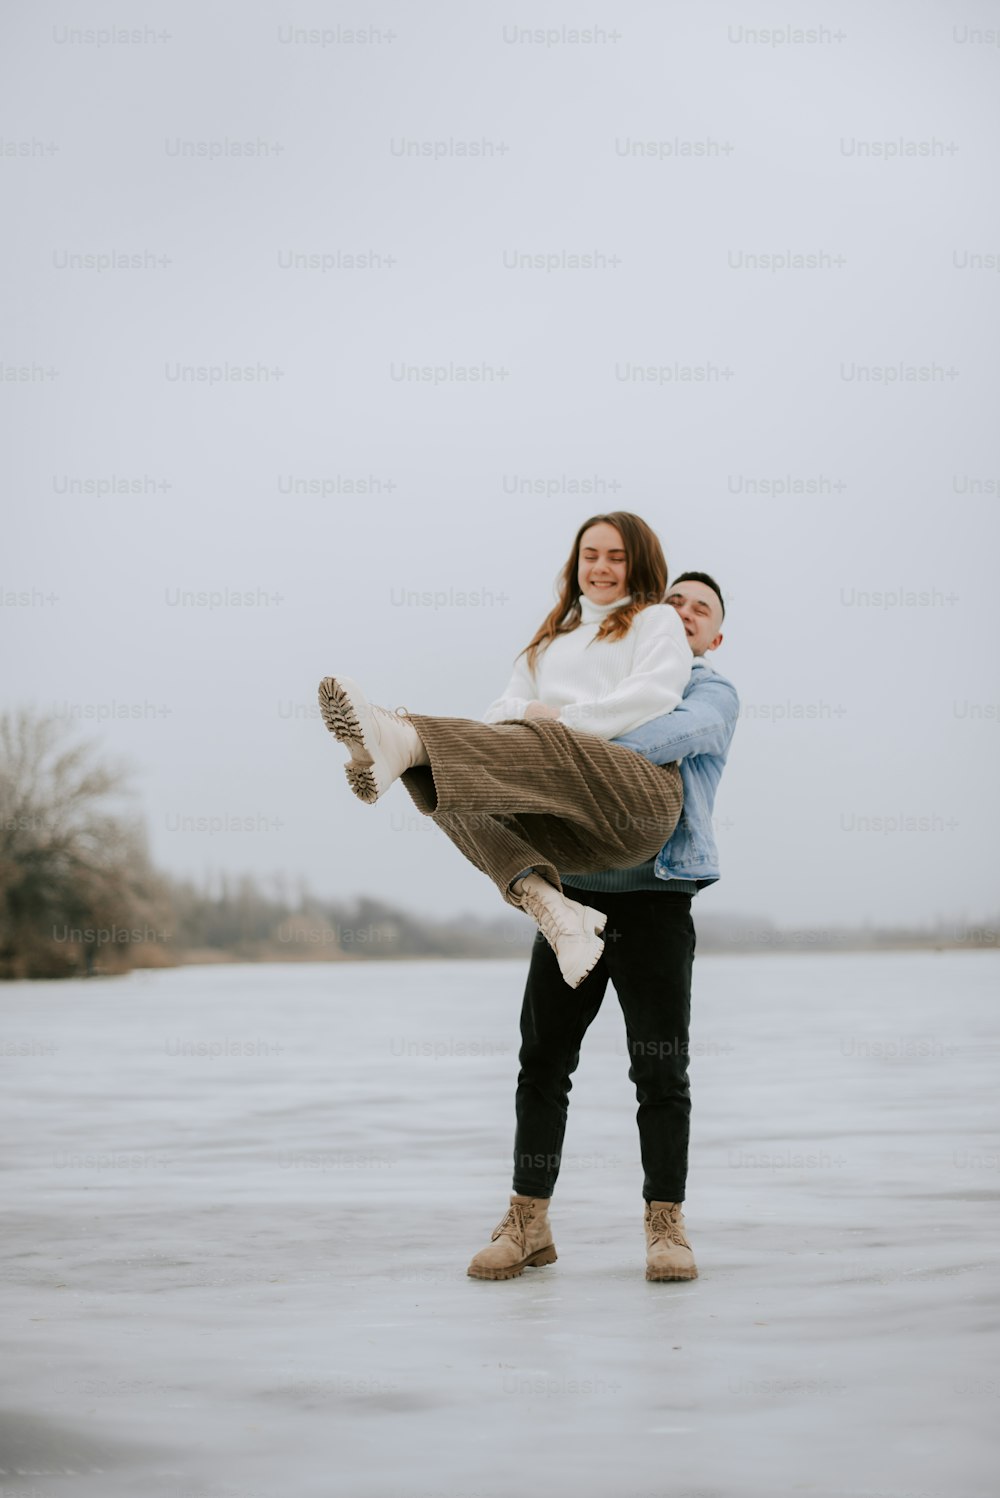 a man carrying a woman on his back